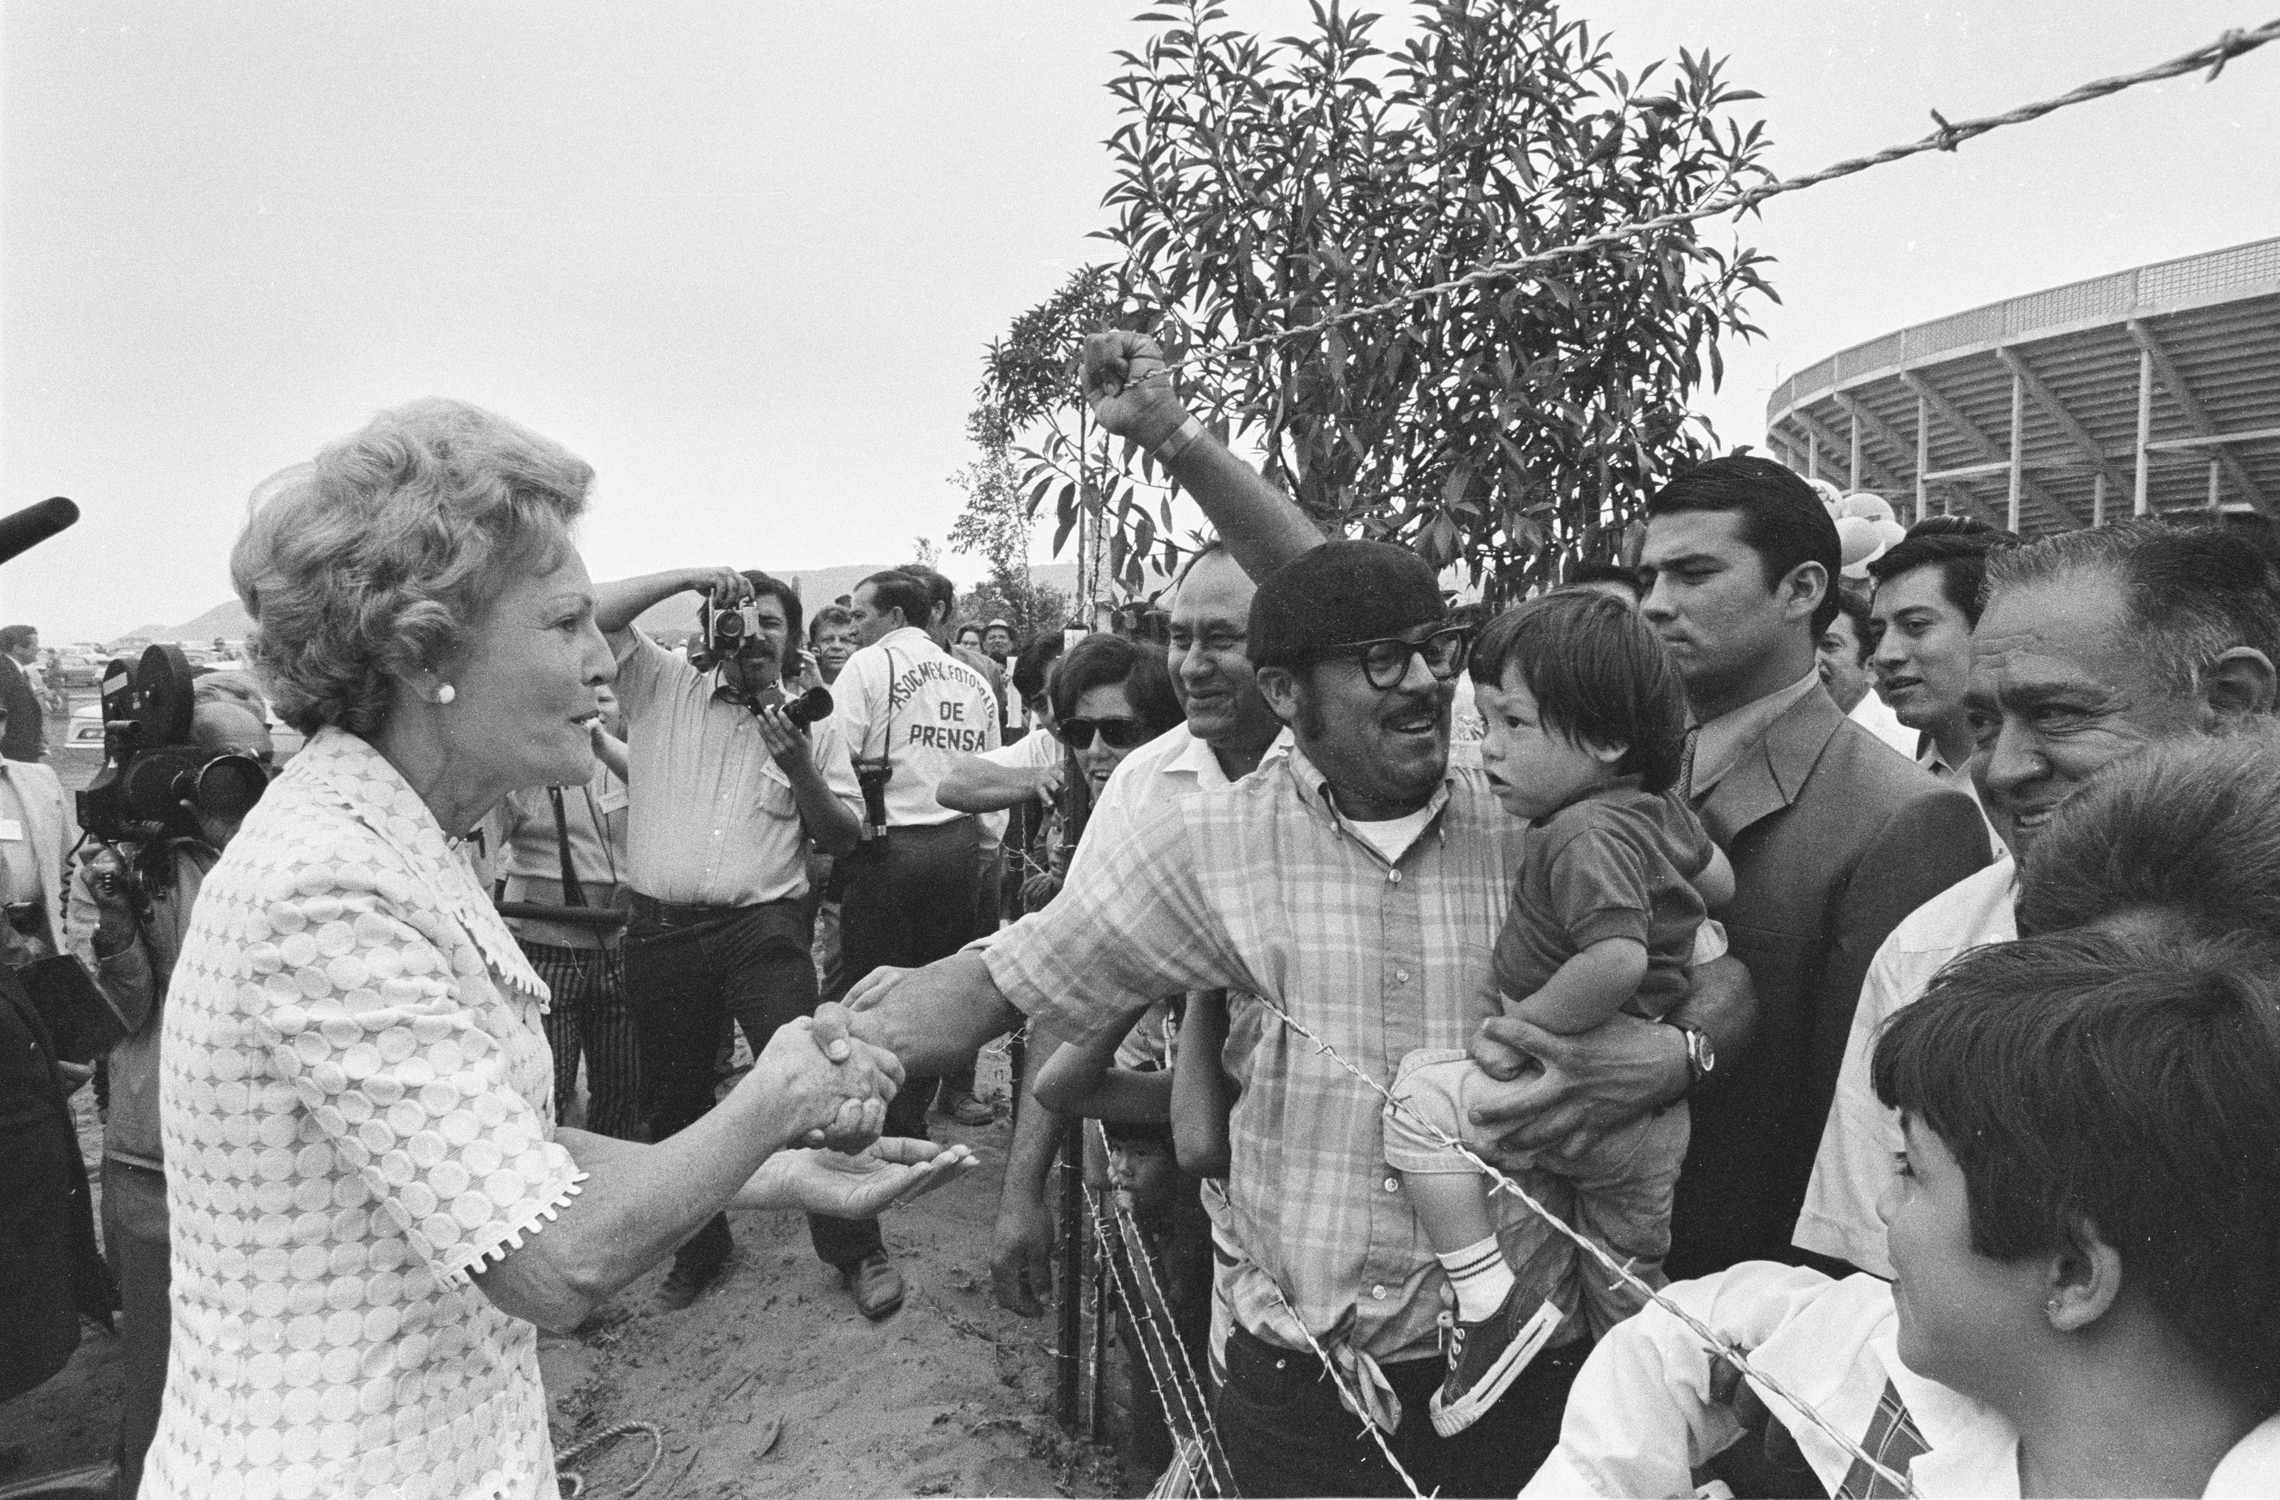 79. Pat Nixon at the barbed wire border fence between the US and Mexico which she asked to have removed.